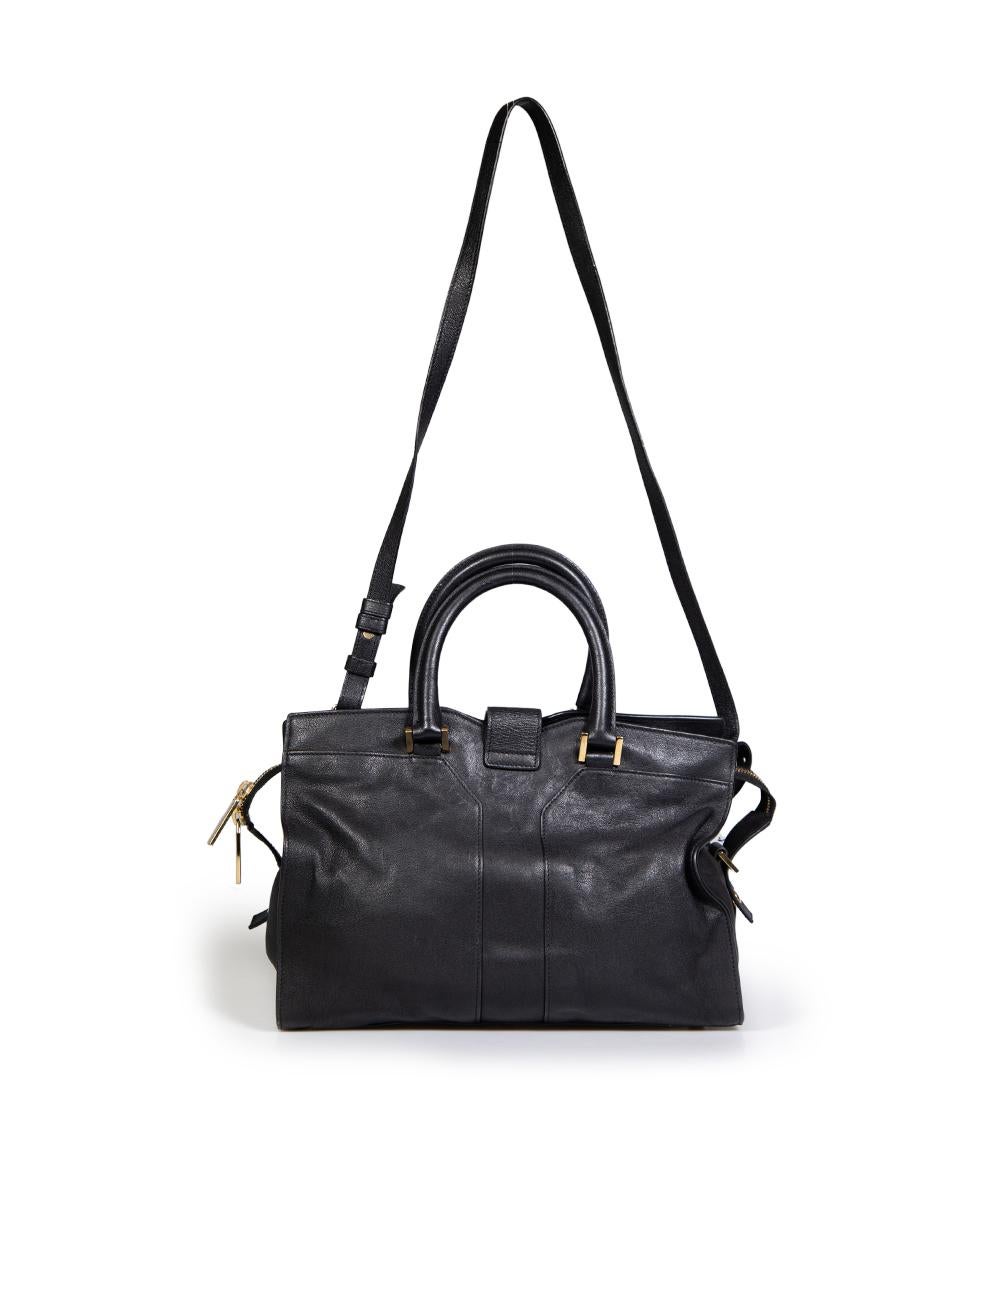 Saint Laurent Black Leather Small Chyc Cabas Tote In Excellent Condition For Sale In London, GB